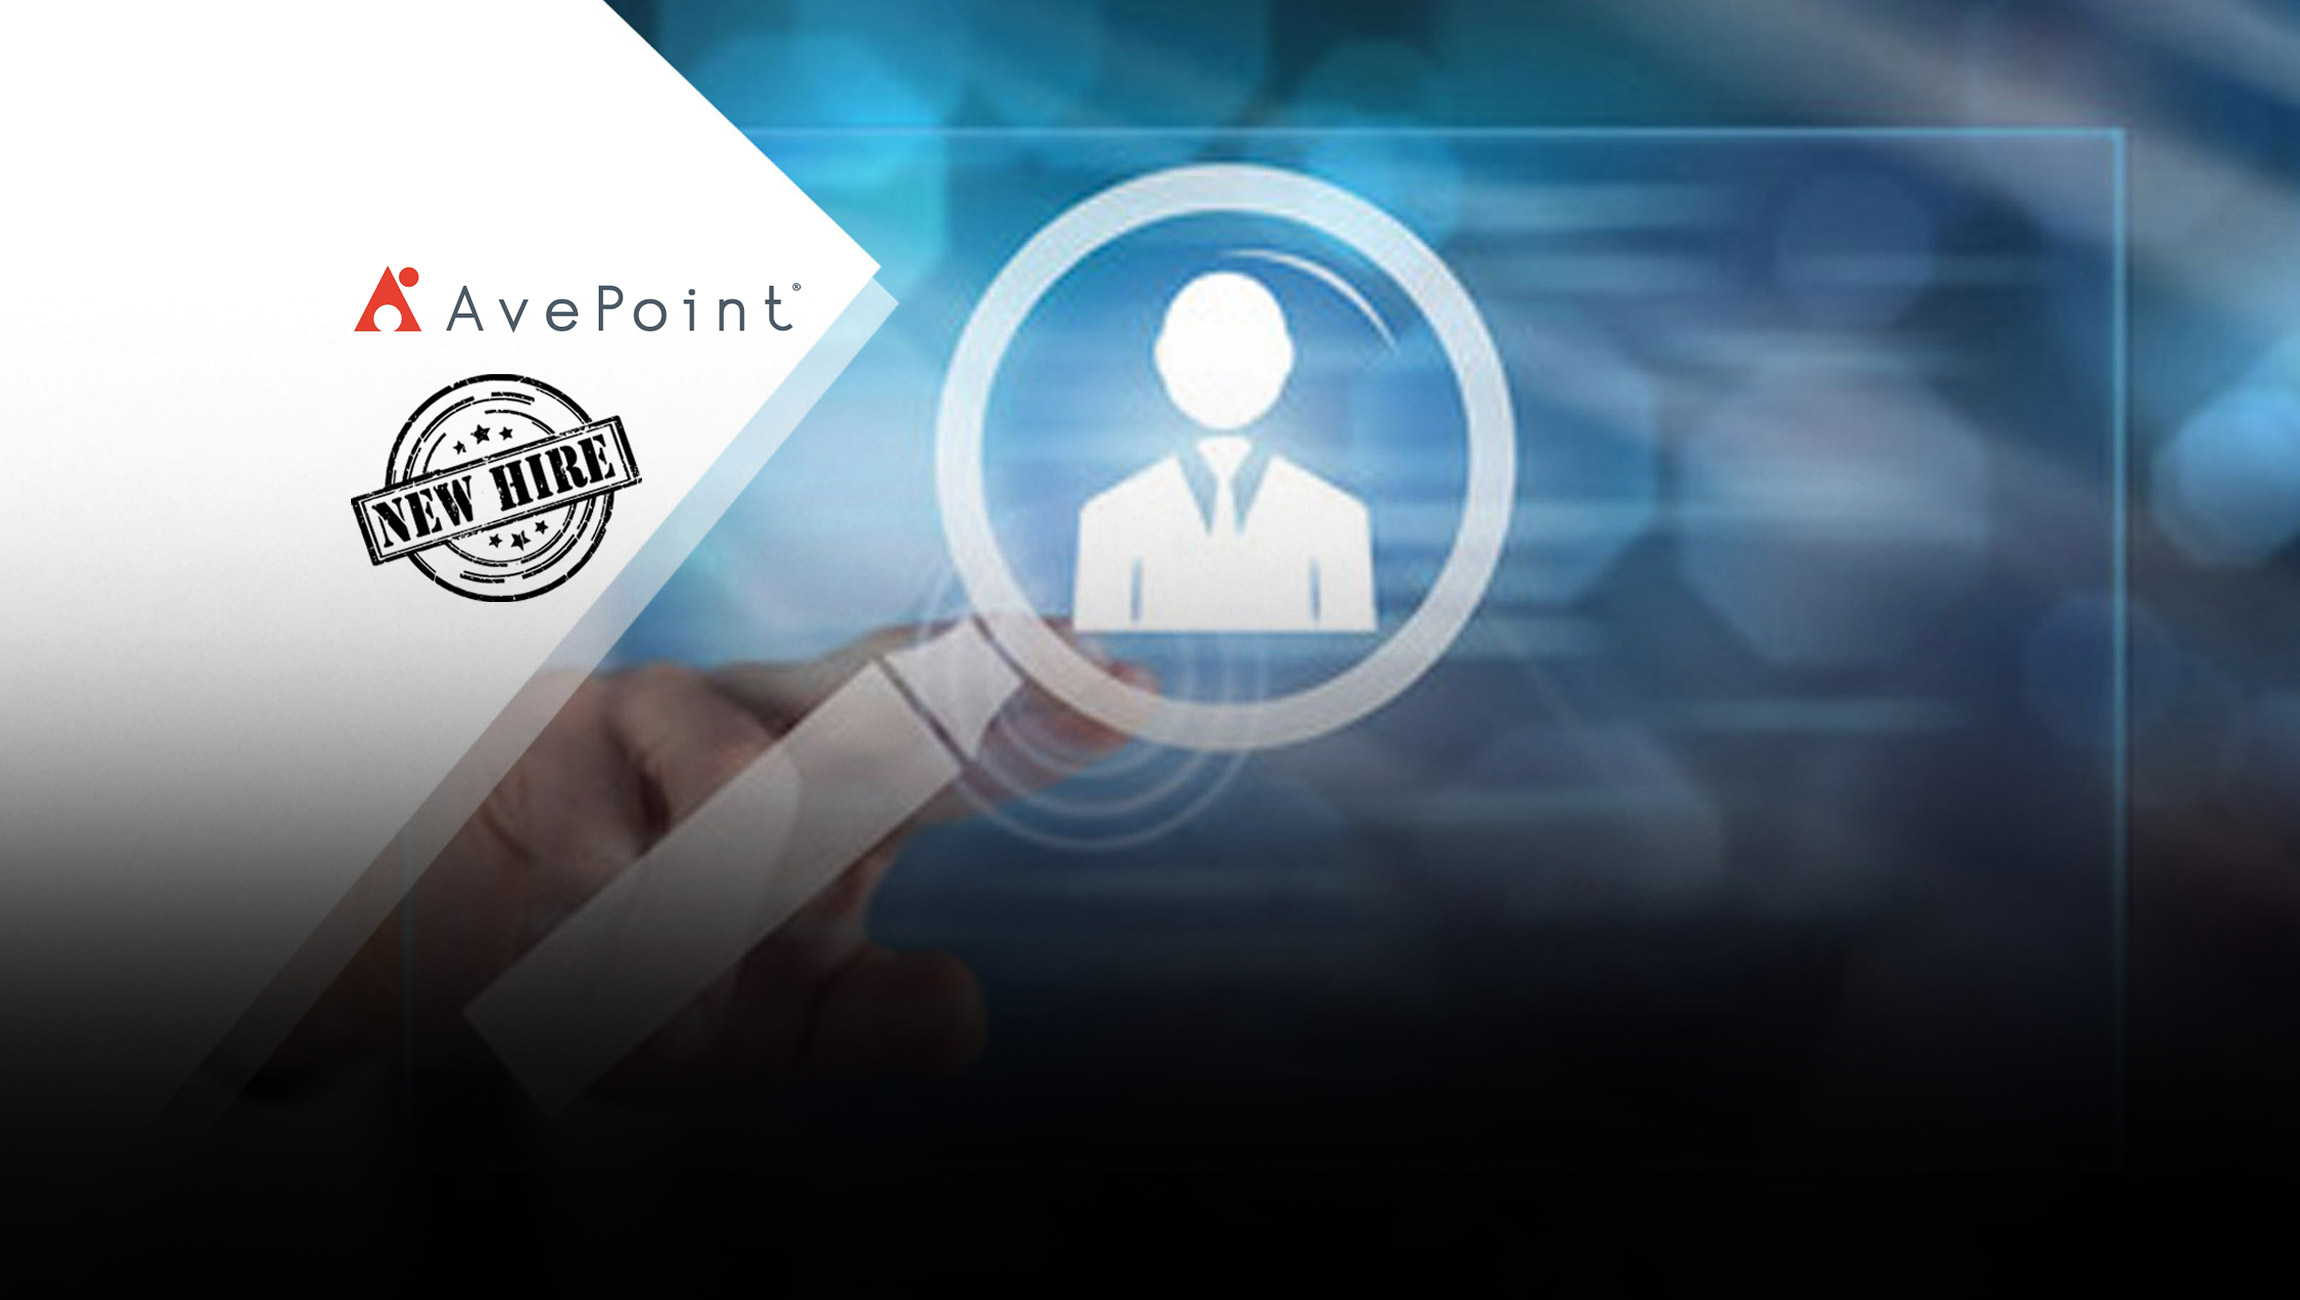 AvePoint, Leading Microsoft 365 Data Management ISV, hires former Palo Alto Networks Leader Jason Beal as Head of Global Channel